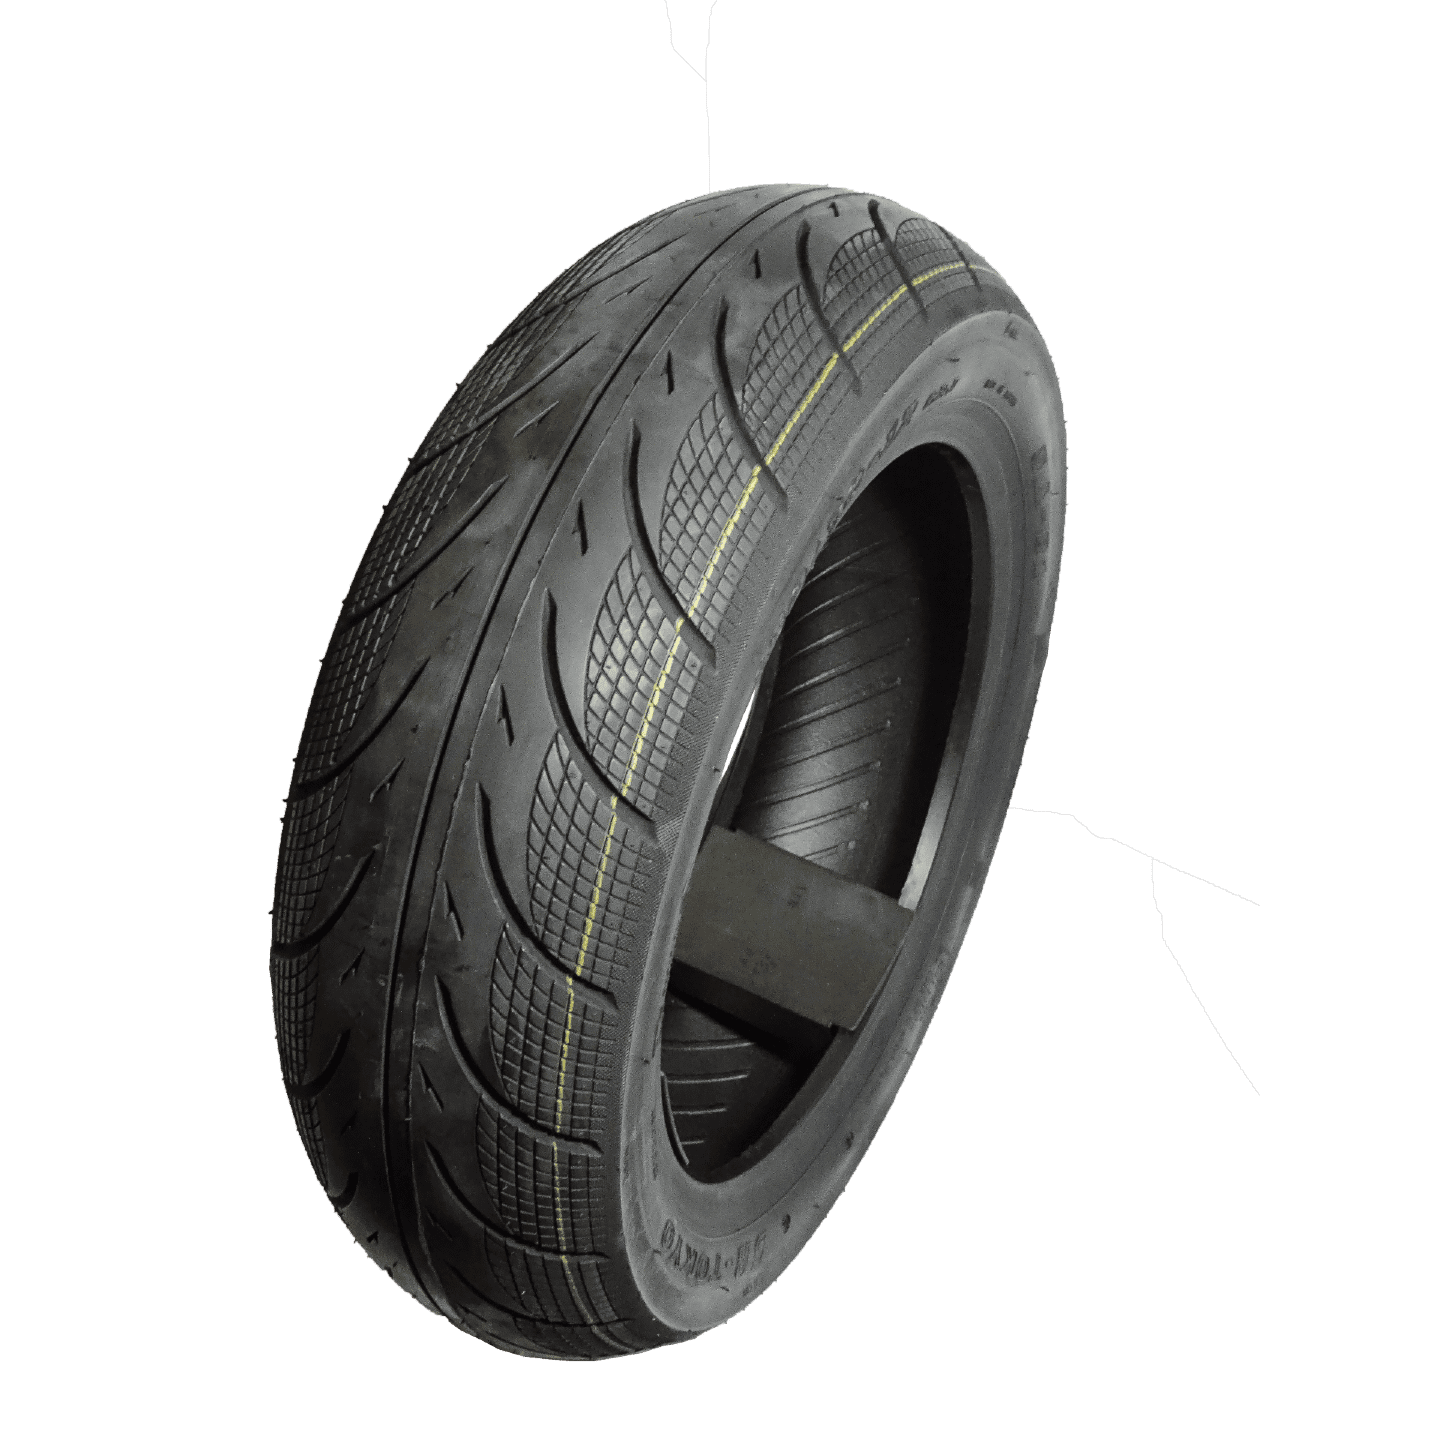 5A TOKYO 5A01 3.00-10 Scooter Tubeless Tire 42J Front/Rear Motorcycle/Moped 10 Rim